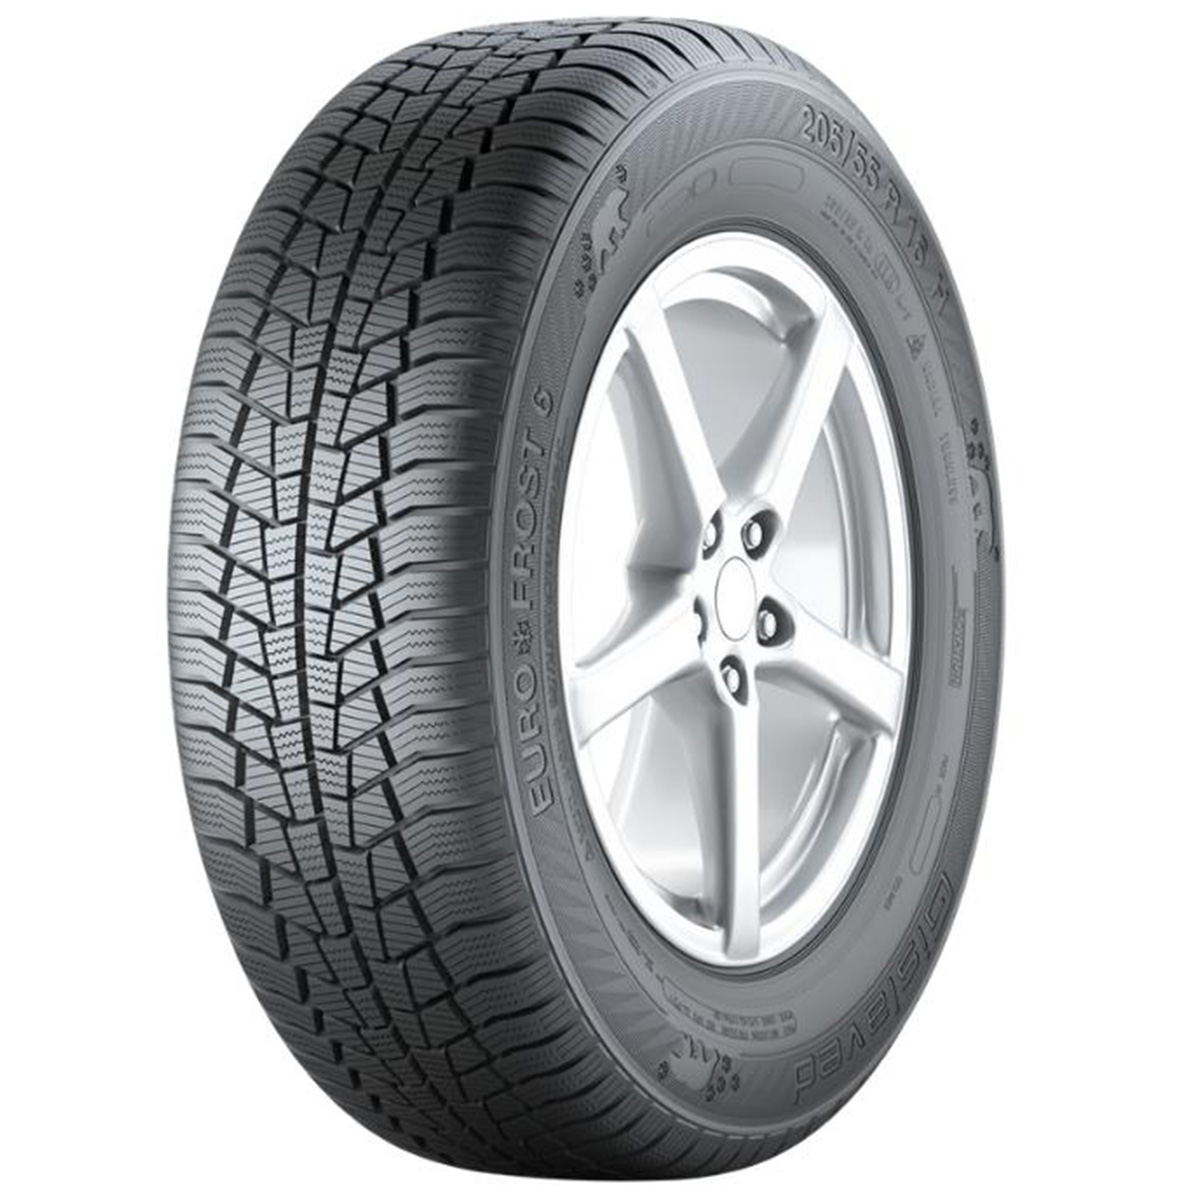 GISLAVED 215/70X16 100H FR EURO*FROST 6 WINTER 